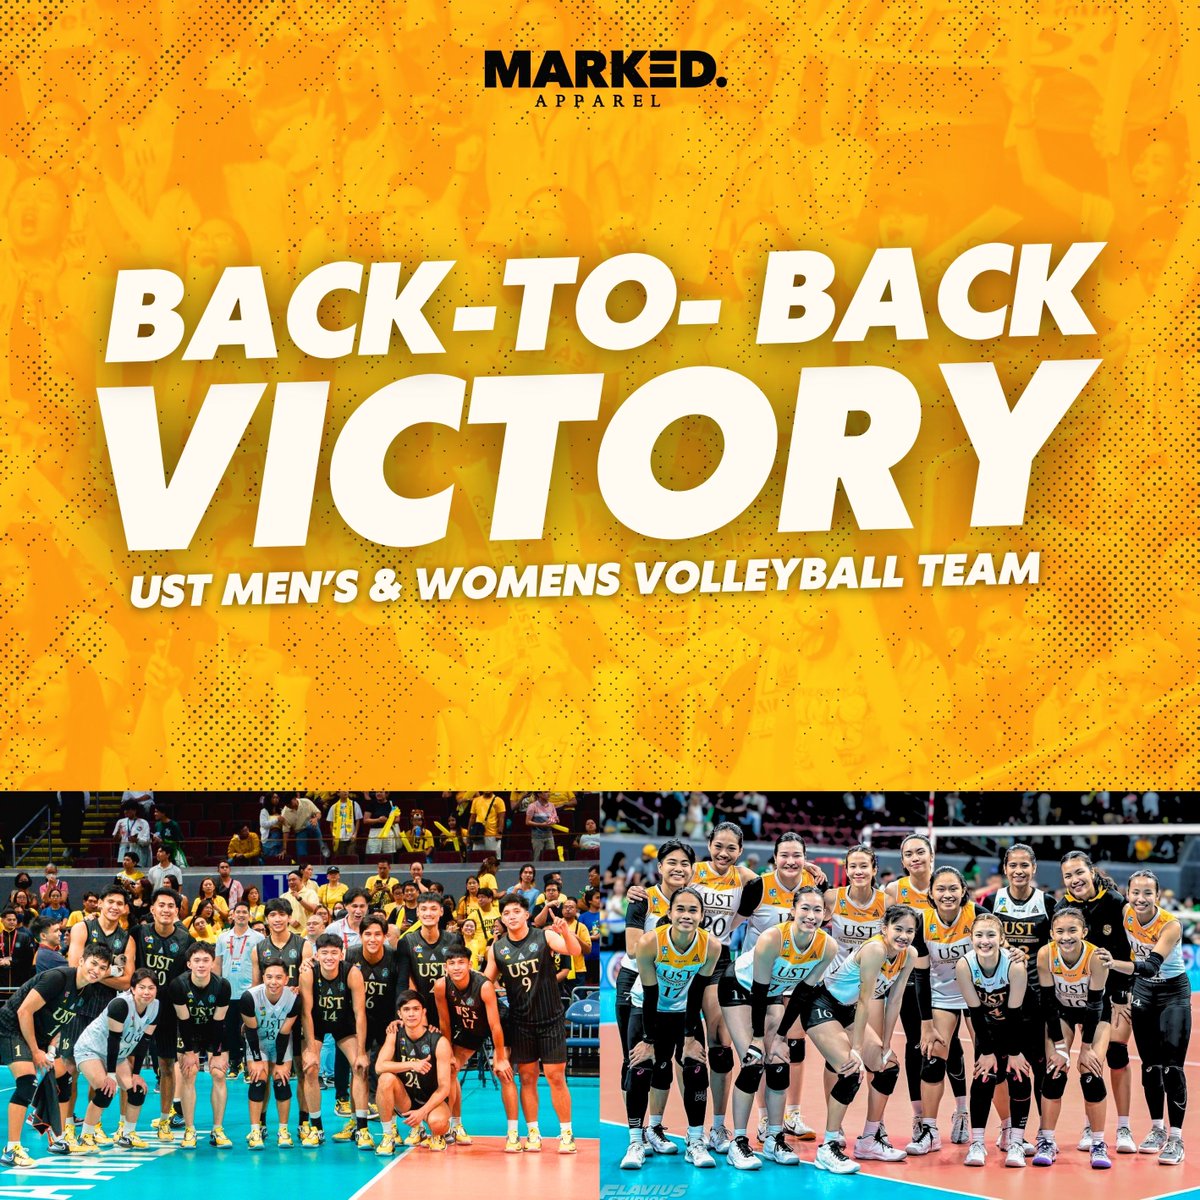 IT'S GOLDEN! 💛

Back-to-back triumphs as our men's and women's volleyball teams dominate the court! The Tiger spirit shines bright!

#GoUSTe #UAAPSeason86 #UAAPVolleyball #USTvsDLSU #USTvsFEU #GetMarkedNow